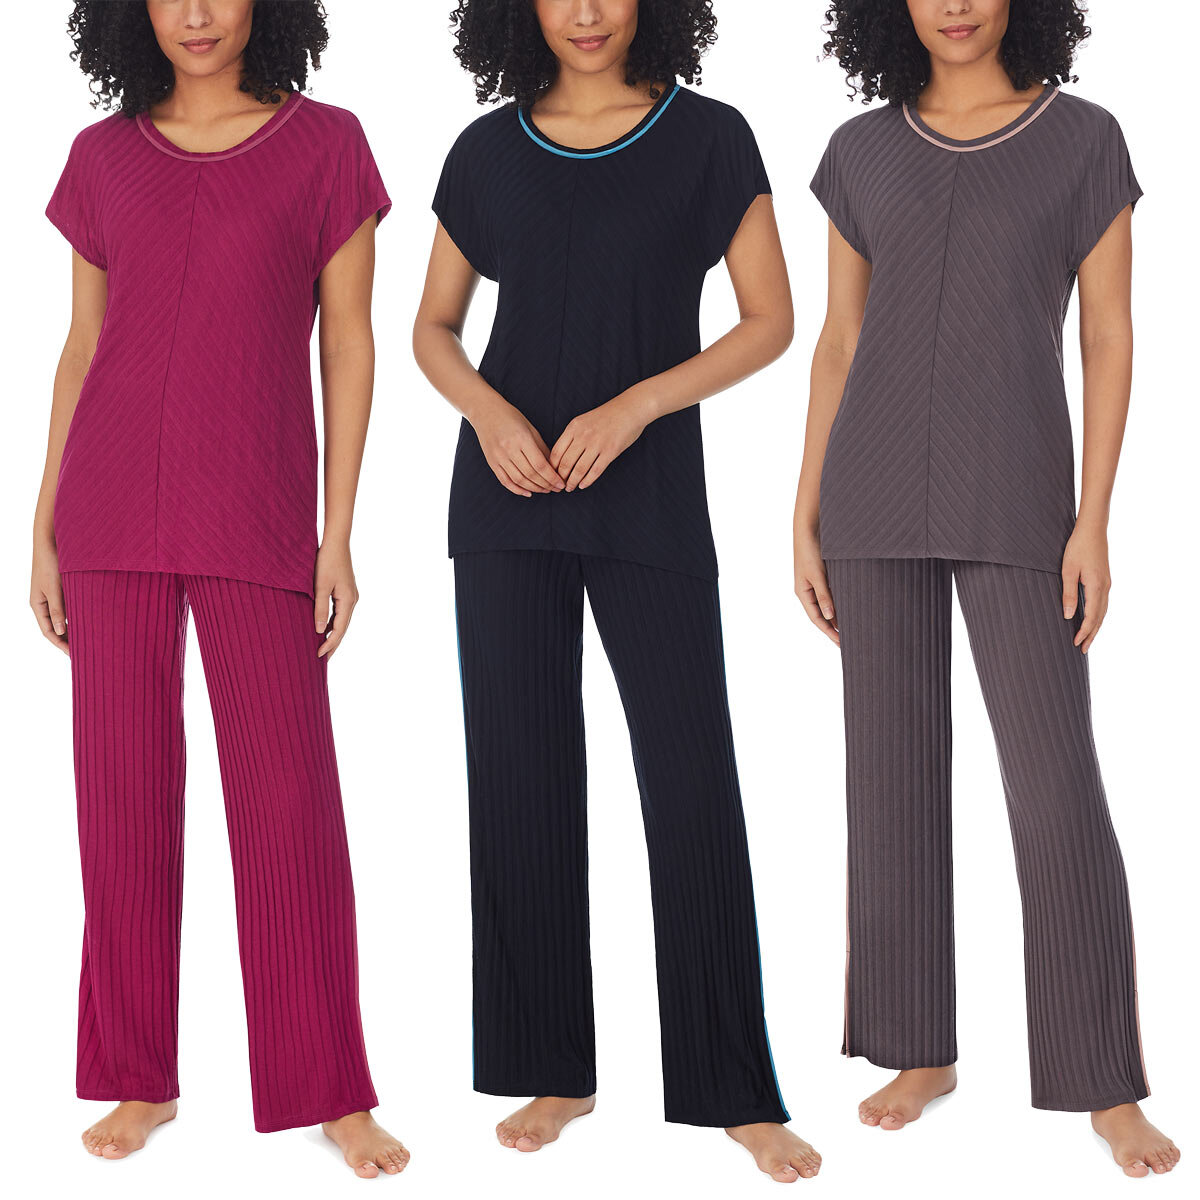 Carole Hochman Midnight Ladies' Ribbed 2 Piece PJ Set in 3 Colours and 4 Sizes